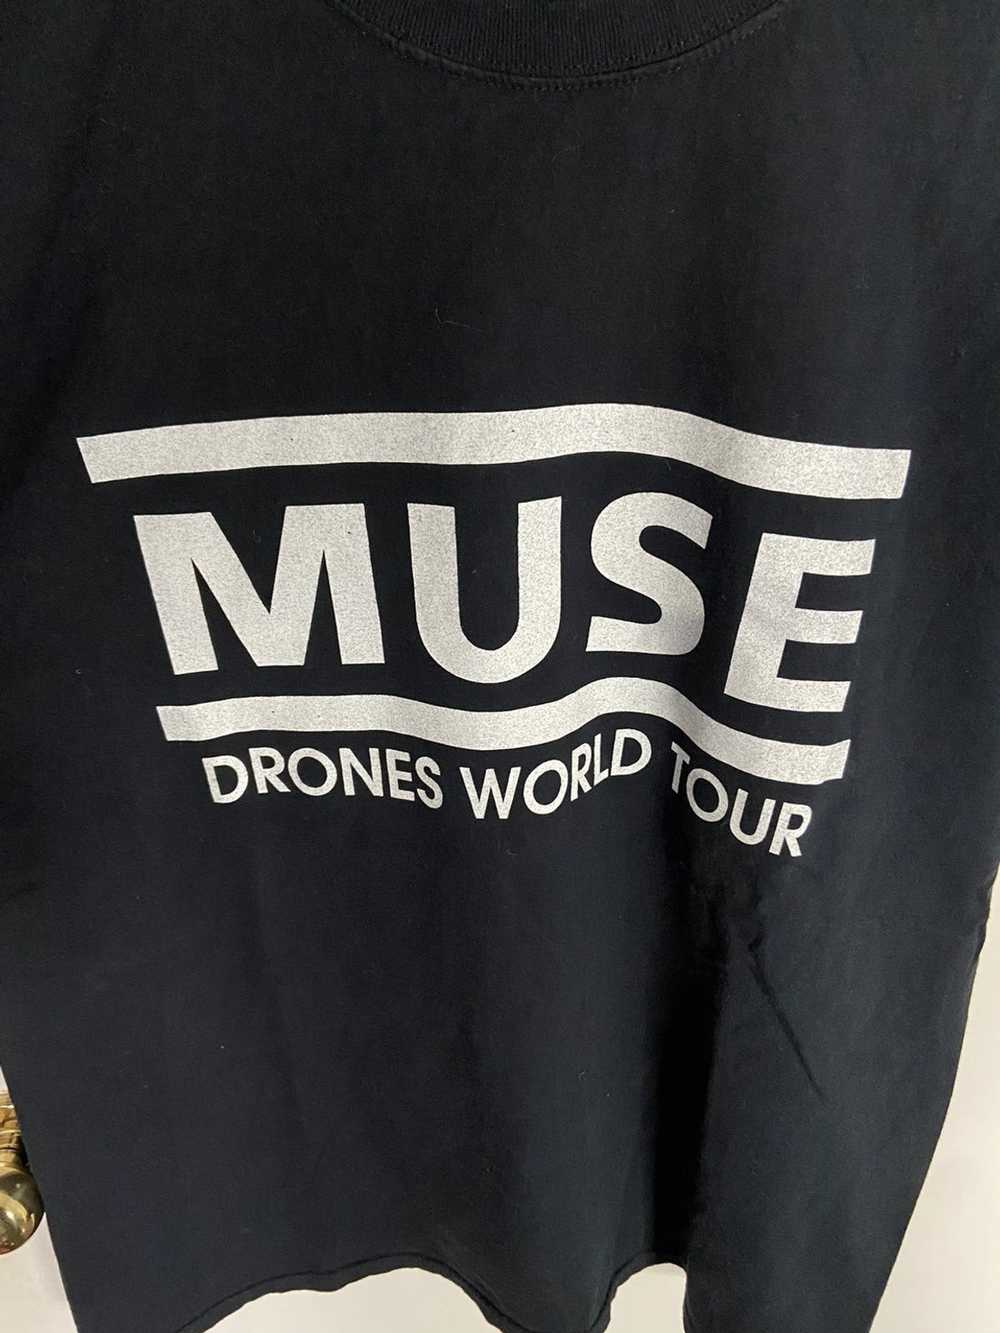 Band Tees × Vintage Muse Drones World Tour T-Shirt - image 2